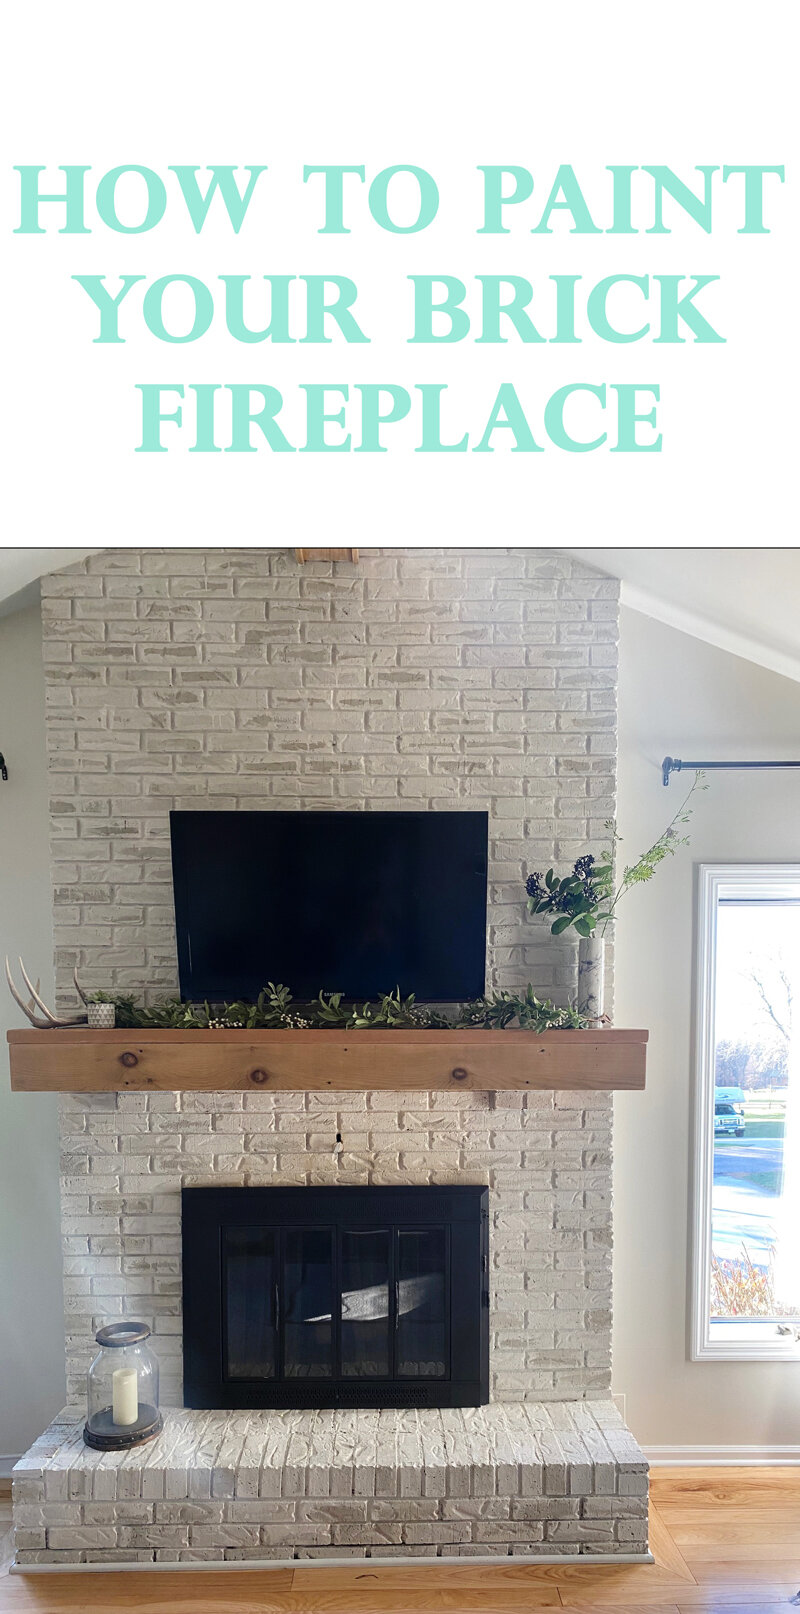 how-to-paint-a-brick-fireplace.jpg